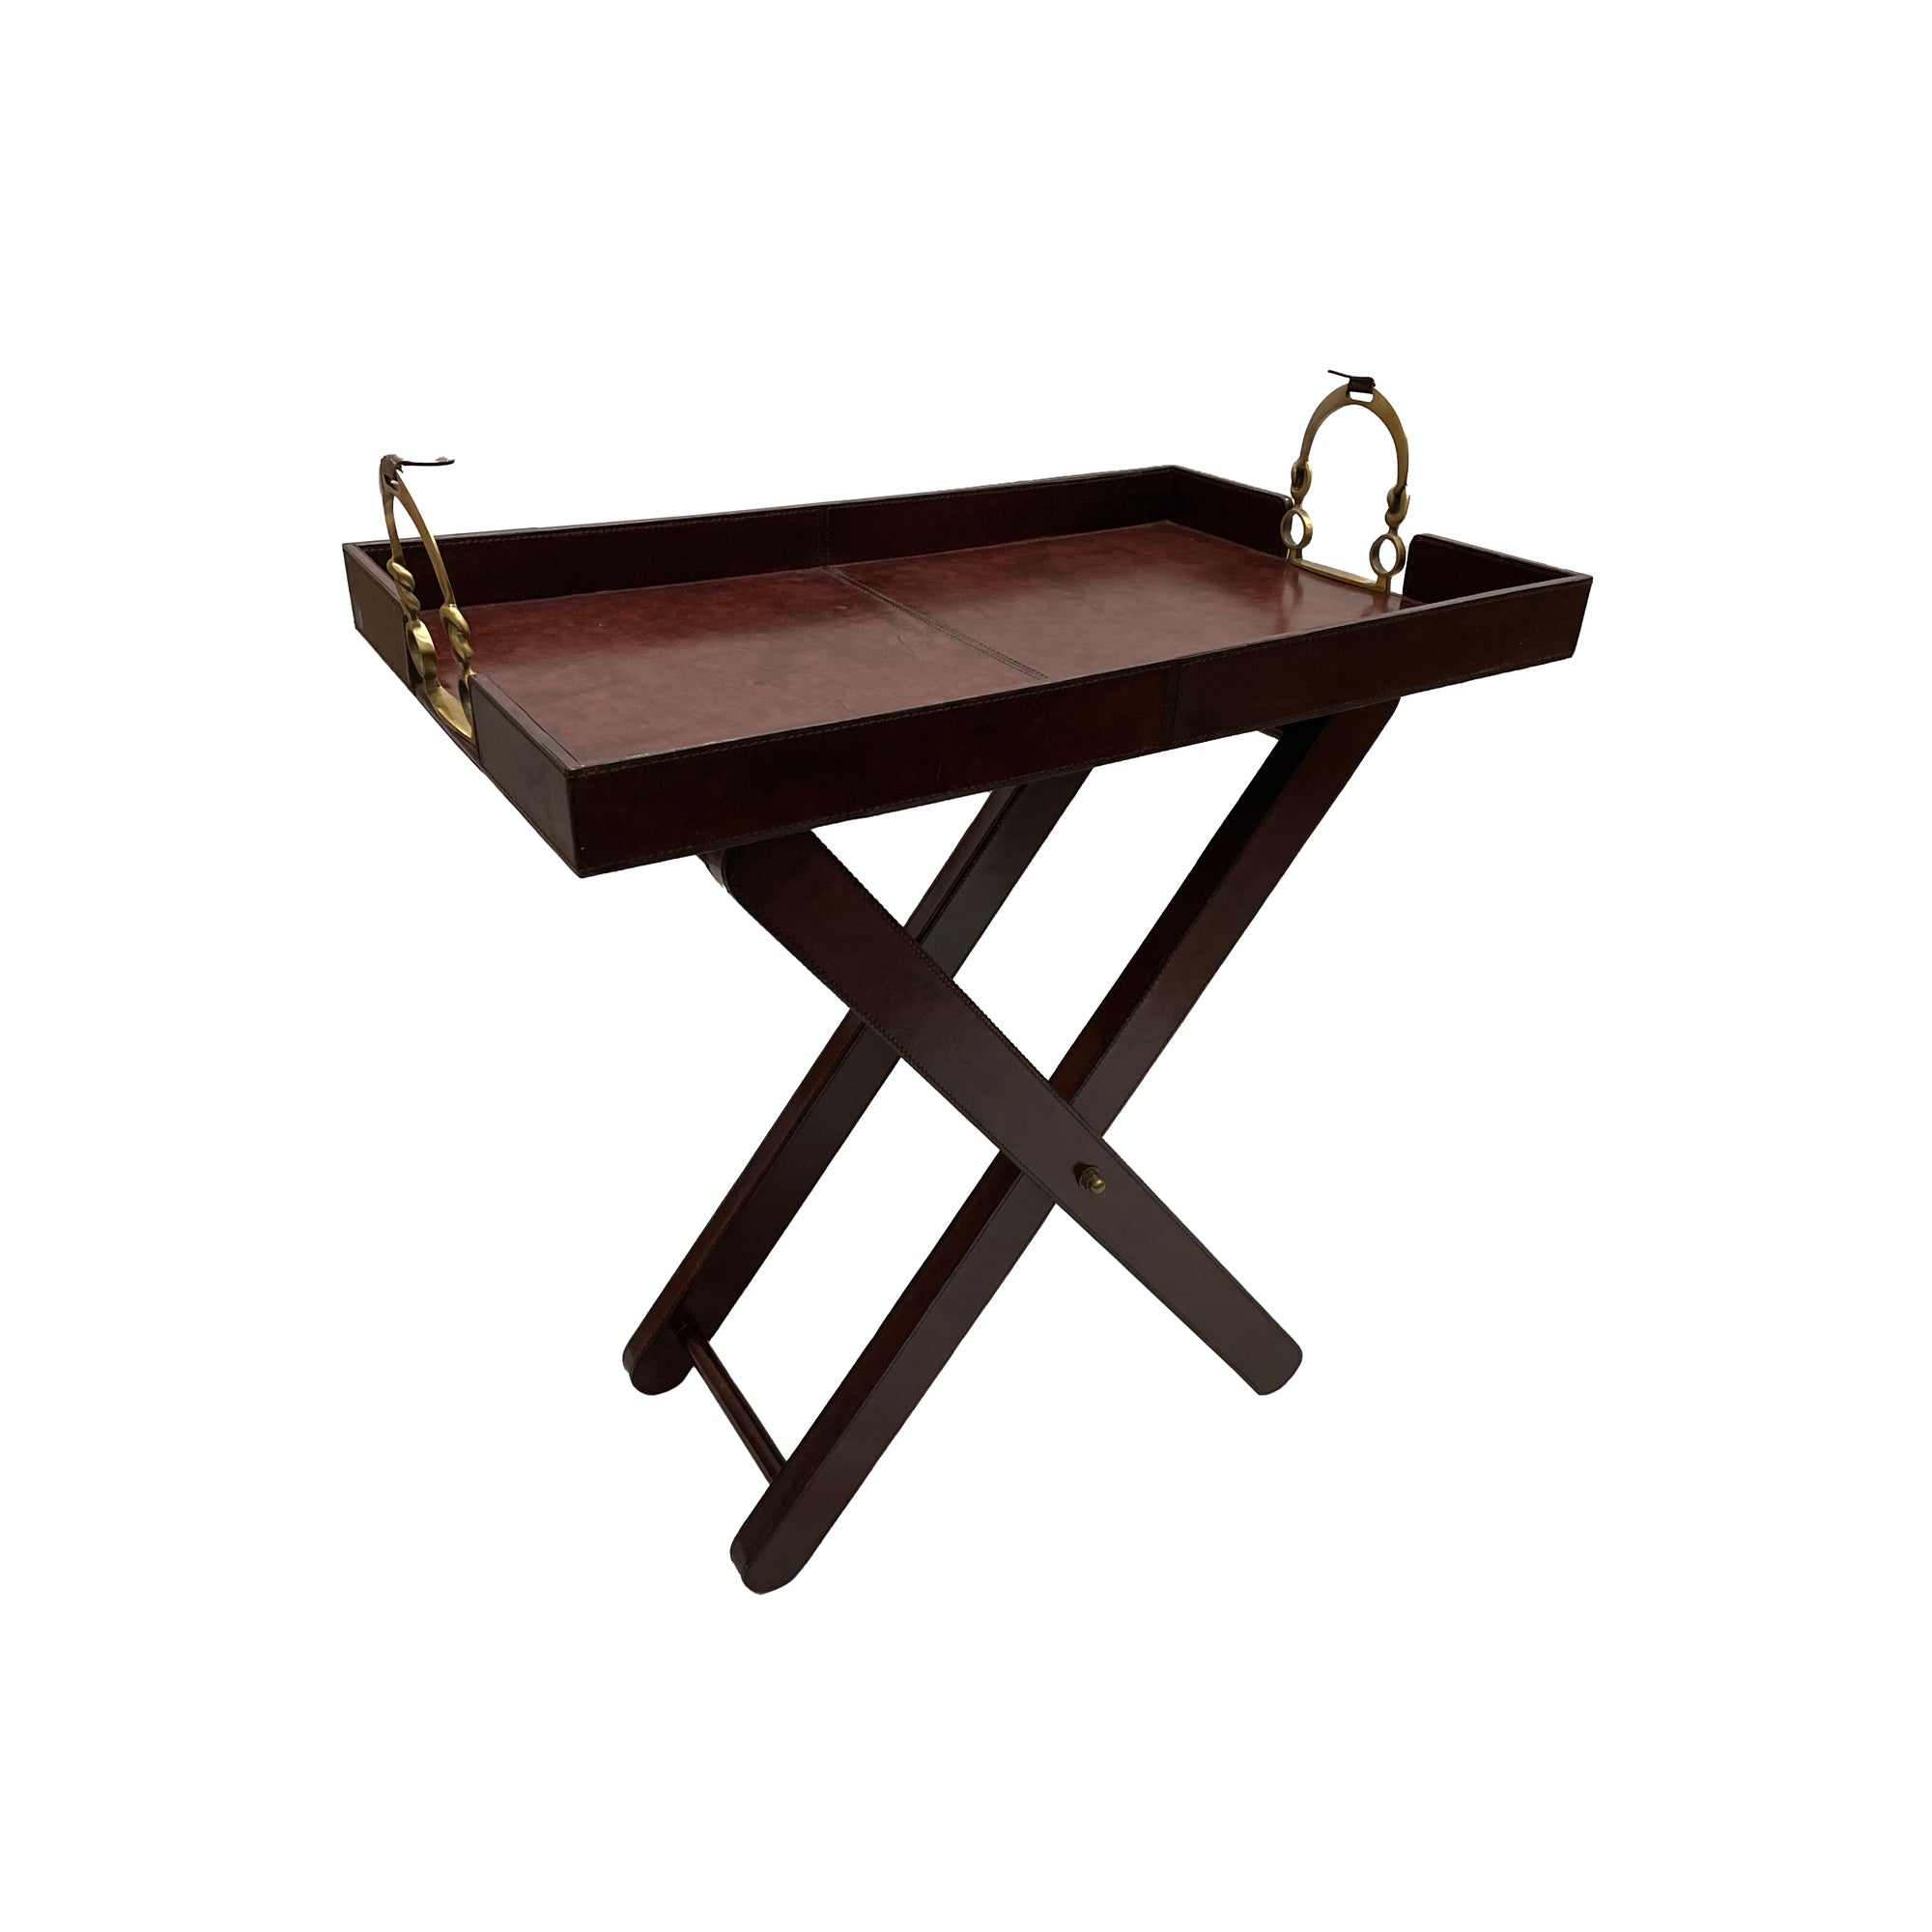 Stefano Butlers Tray With Stirrups - Dark Leather - Notbrand